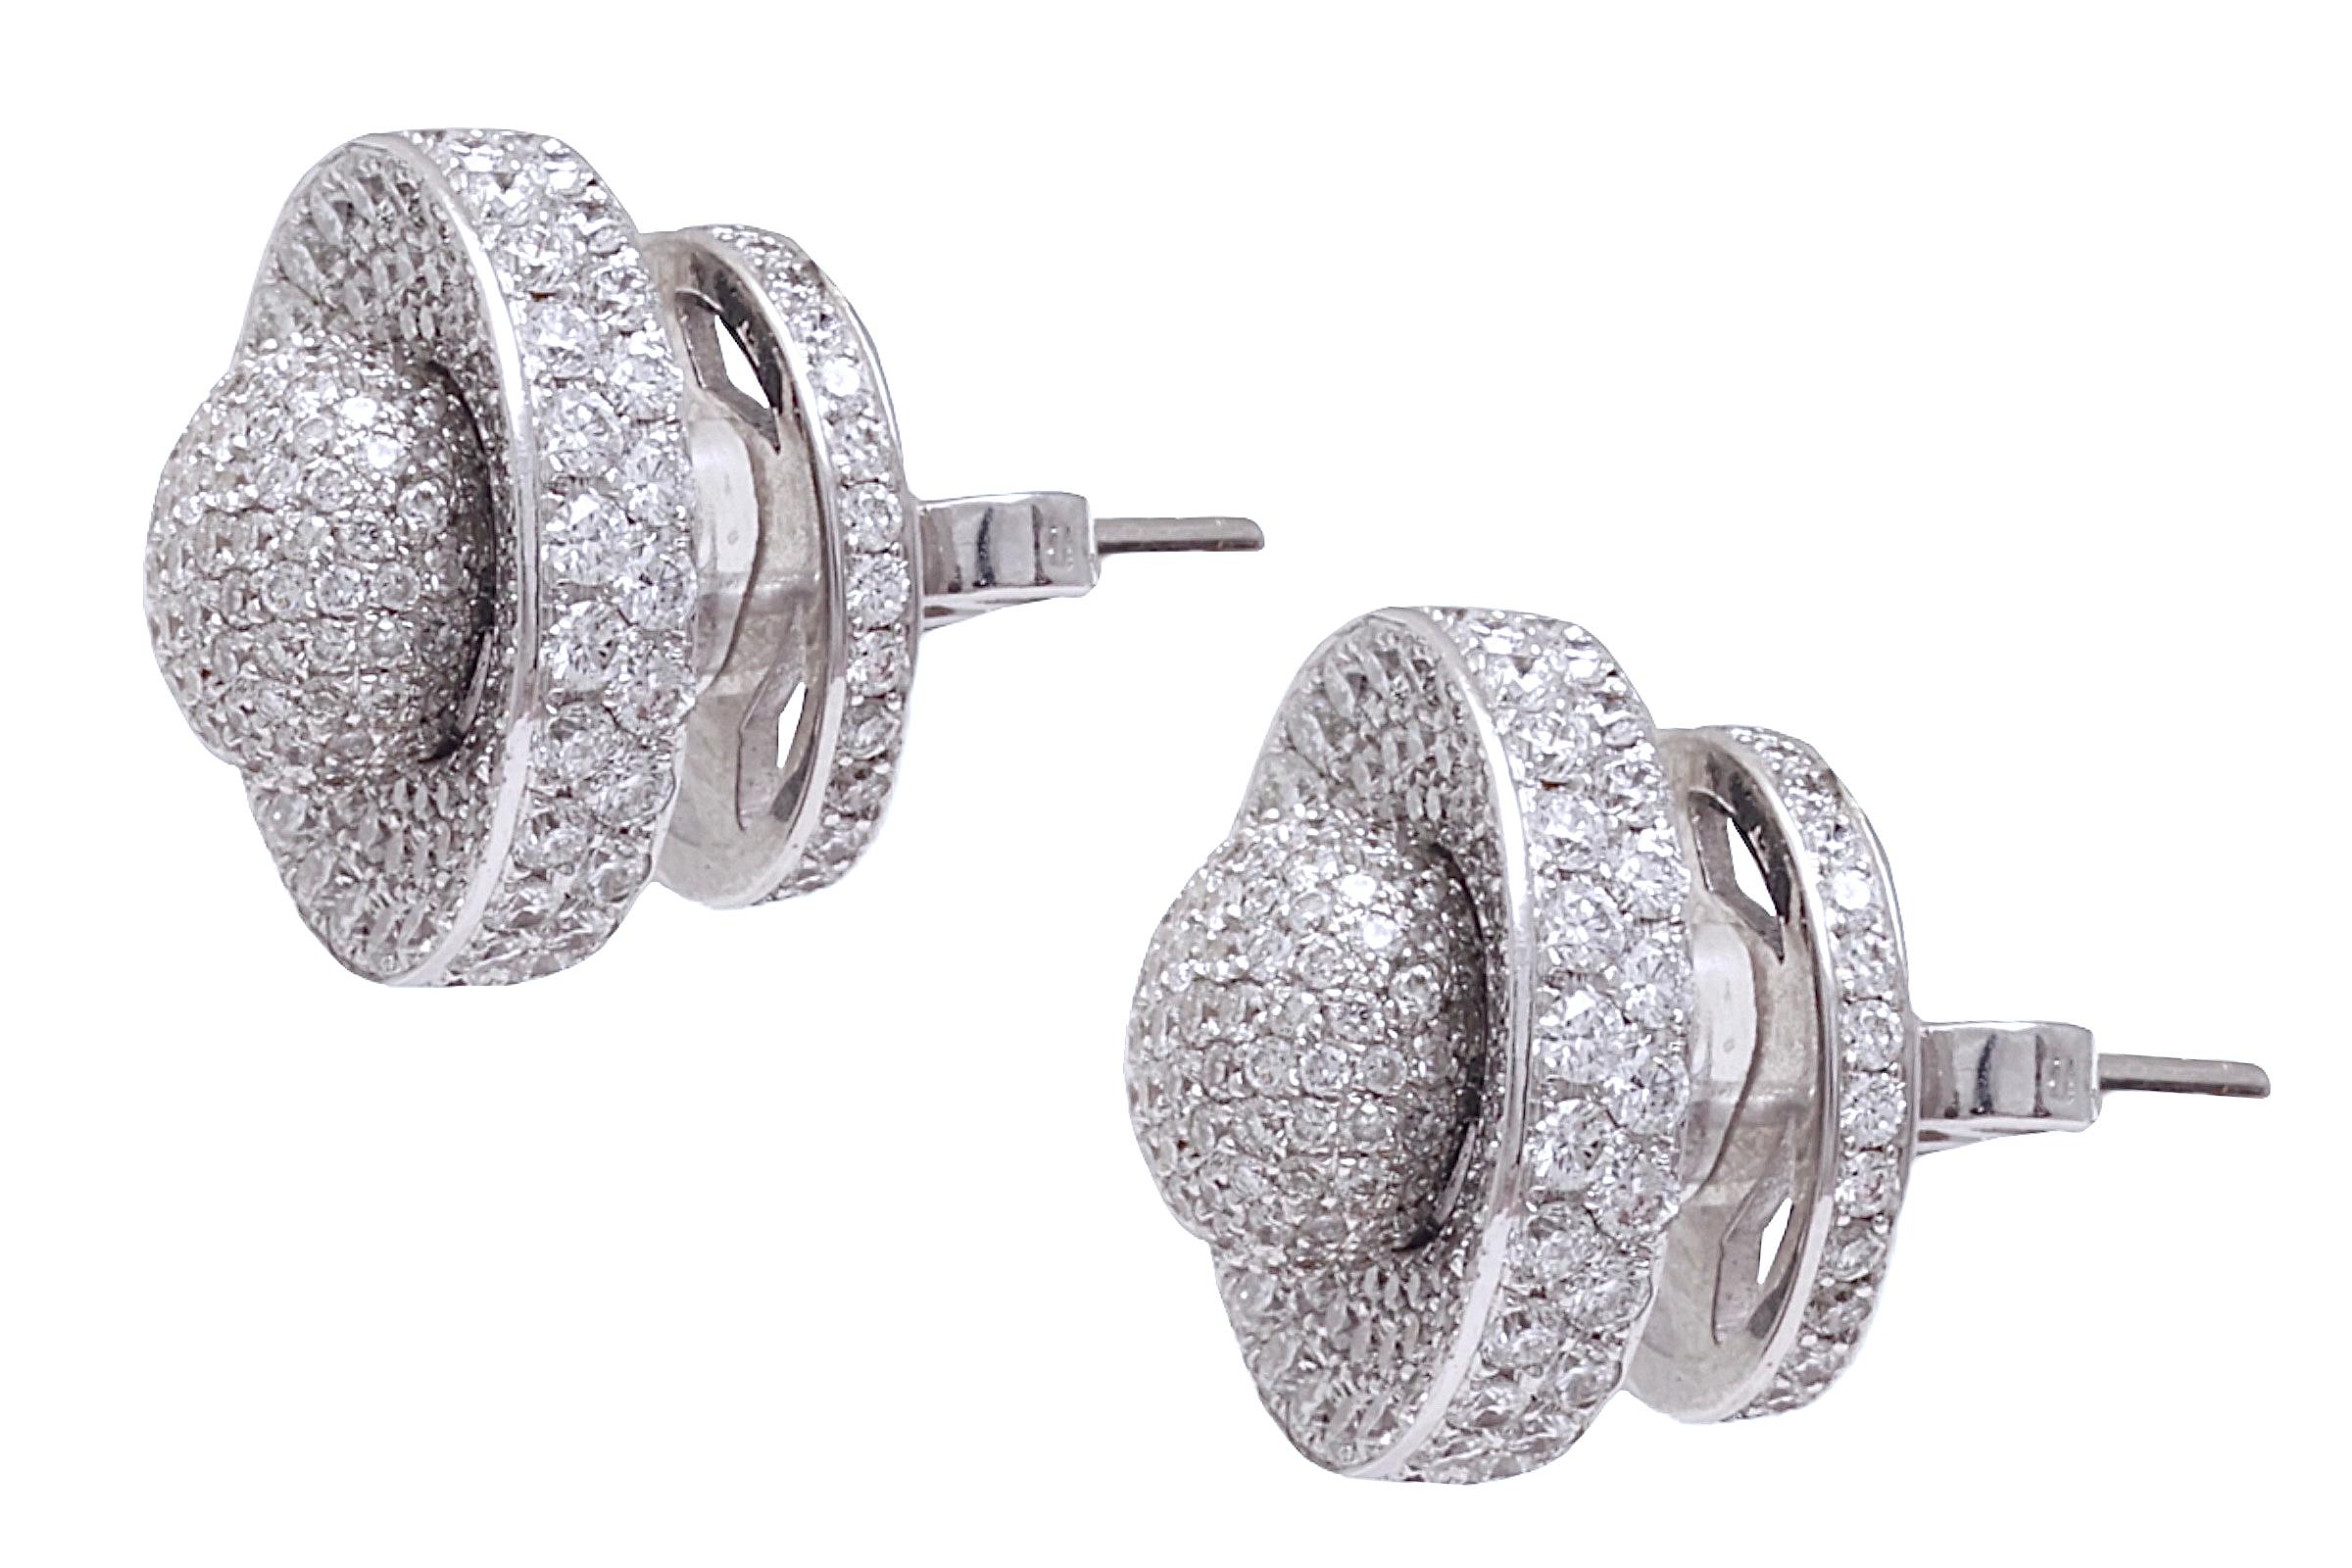 18 kt. White Gold 2 in 1 Stud Earrings With 4.08 ct. Diamonds, Amazing Piece!  For Sale 1